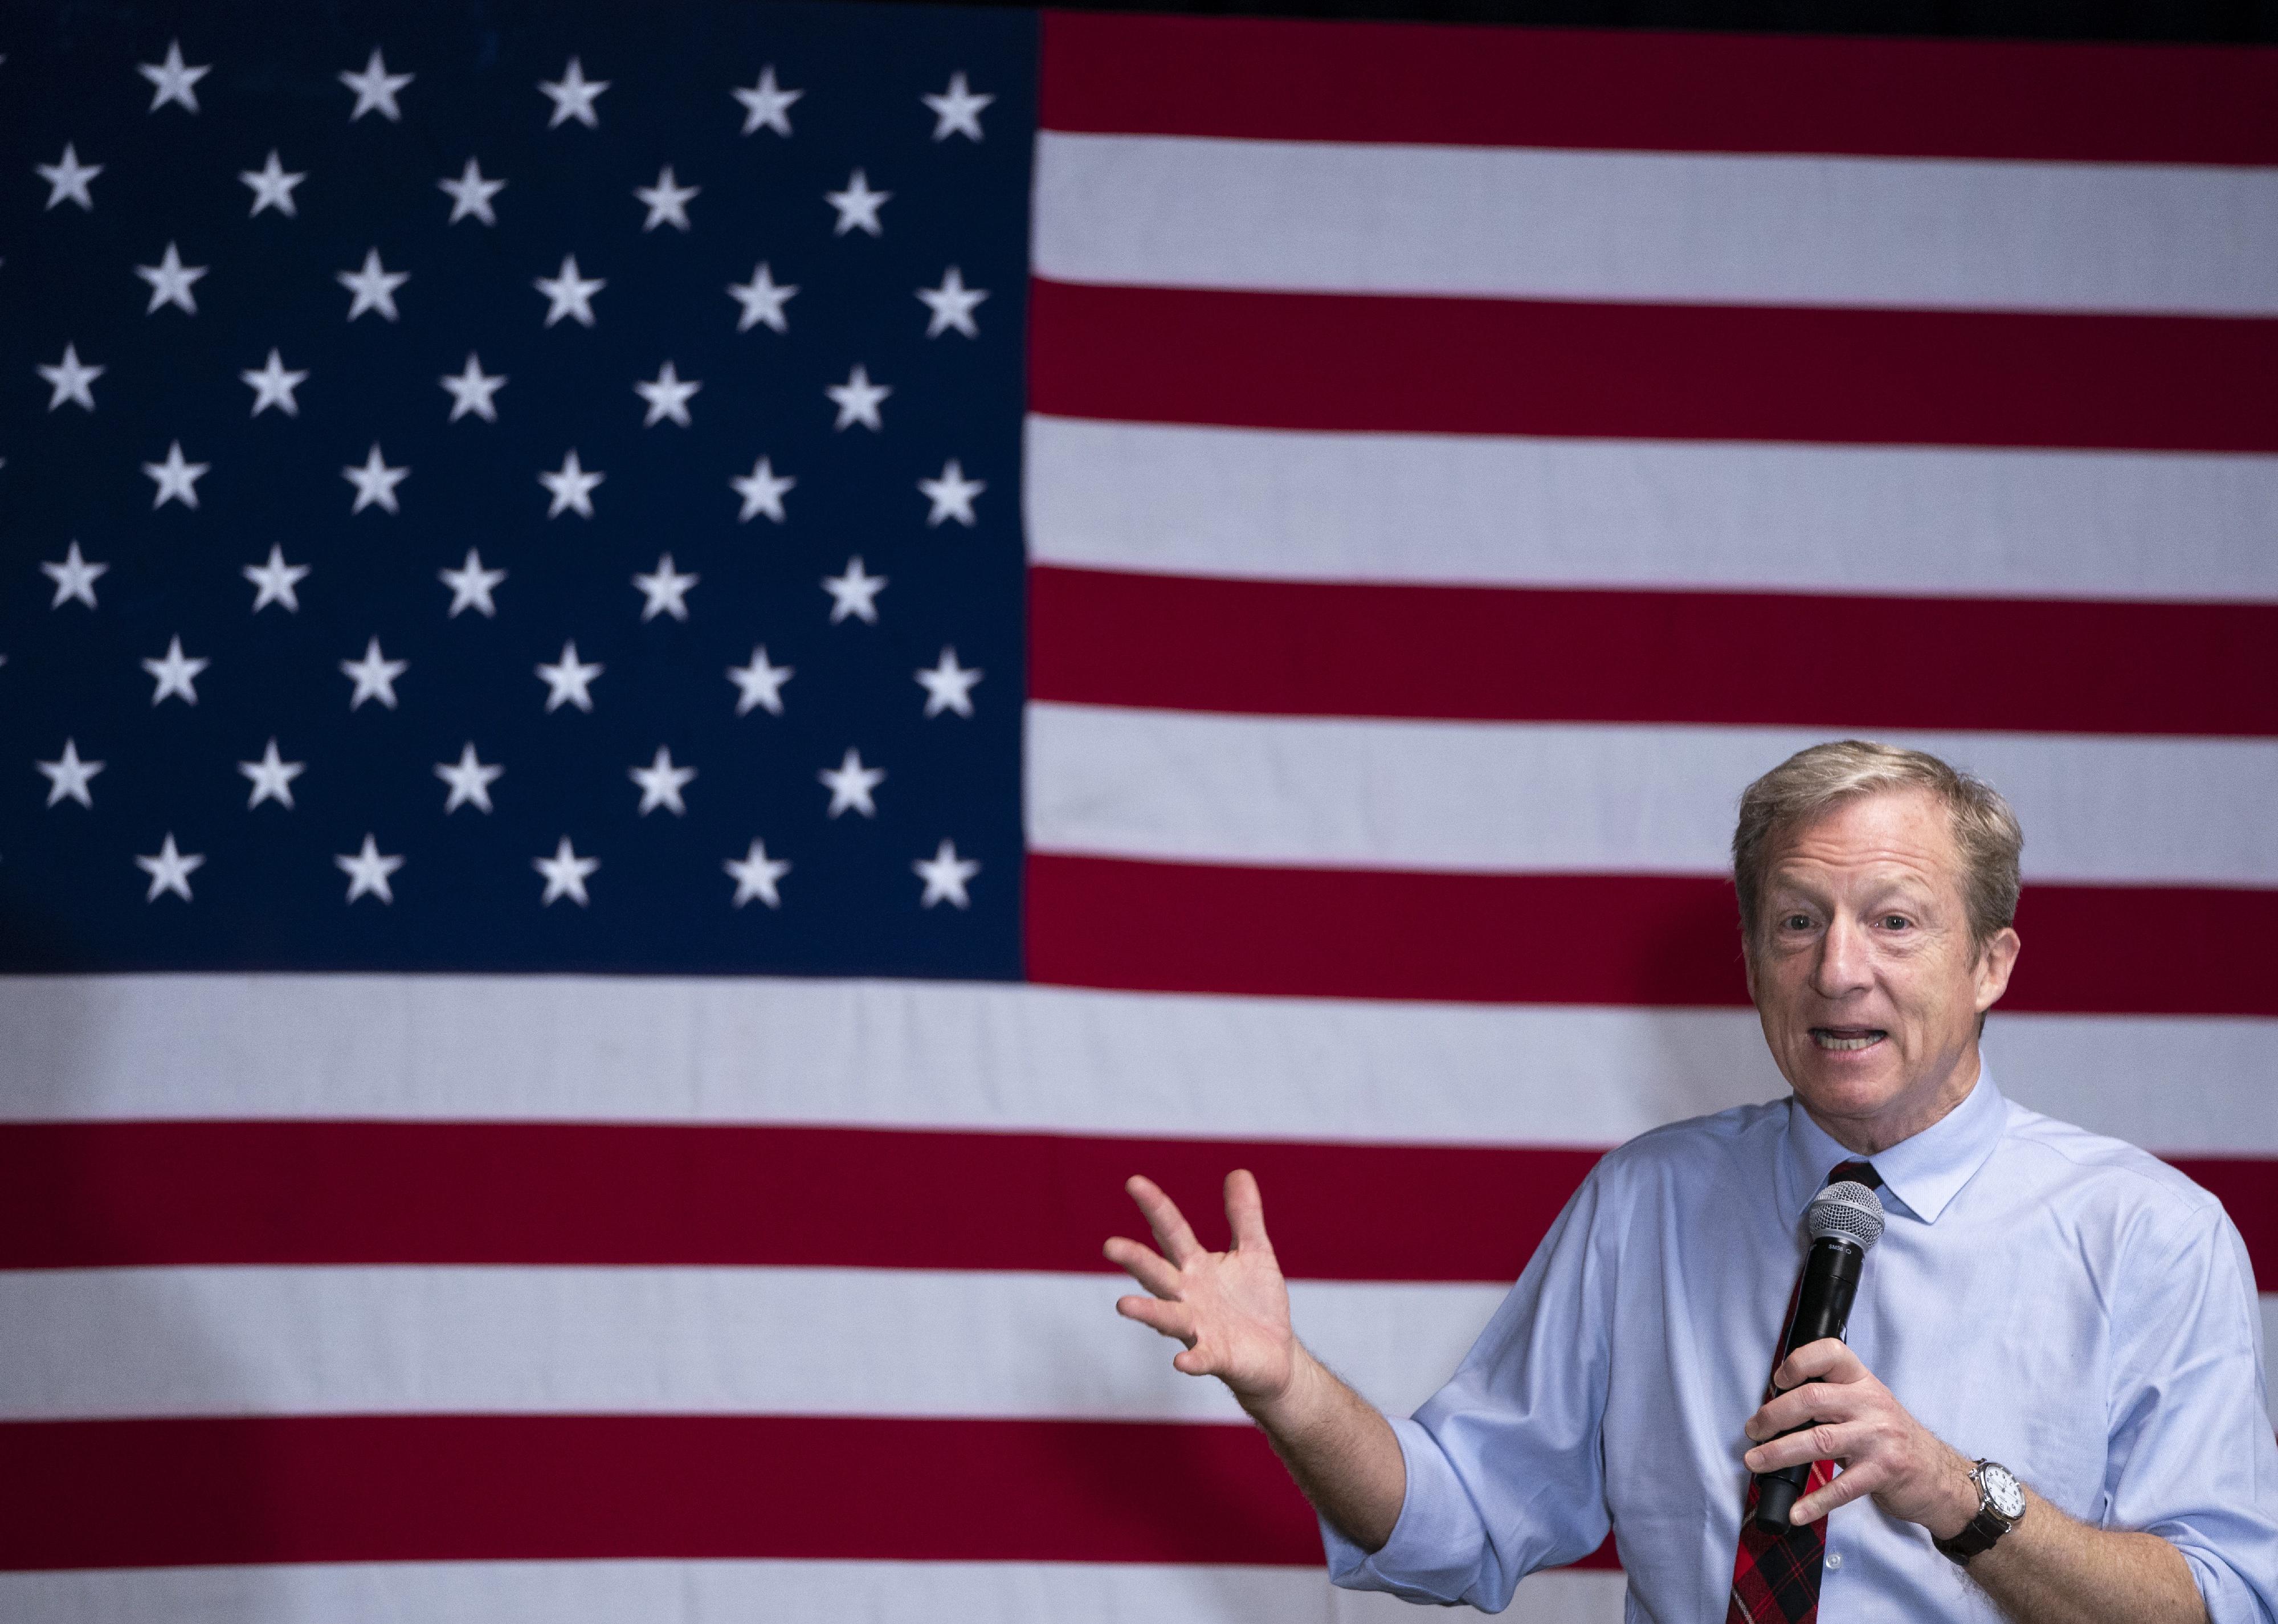 Tom Steyer campaigning in front of an American flag.